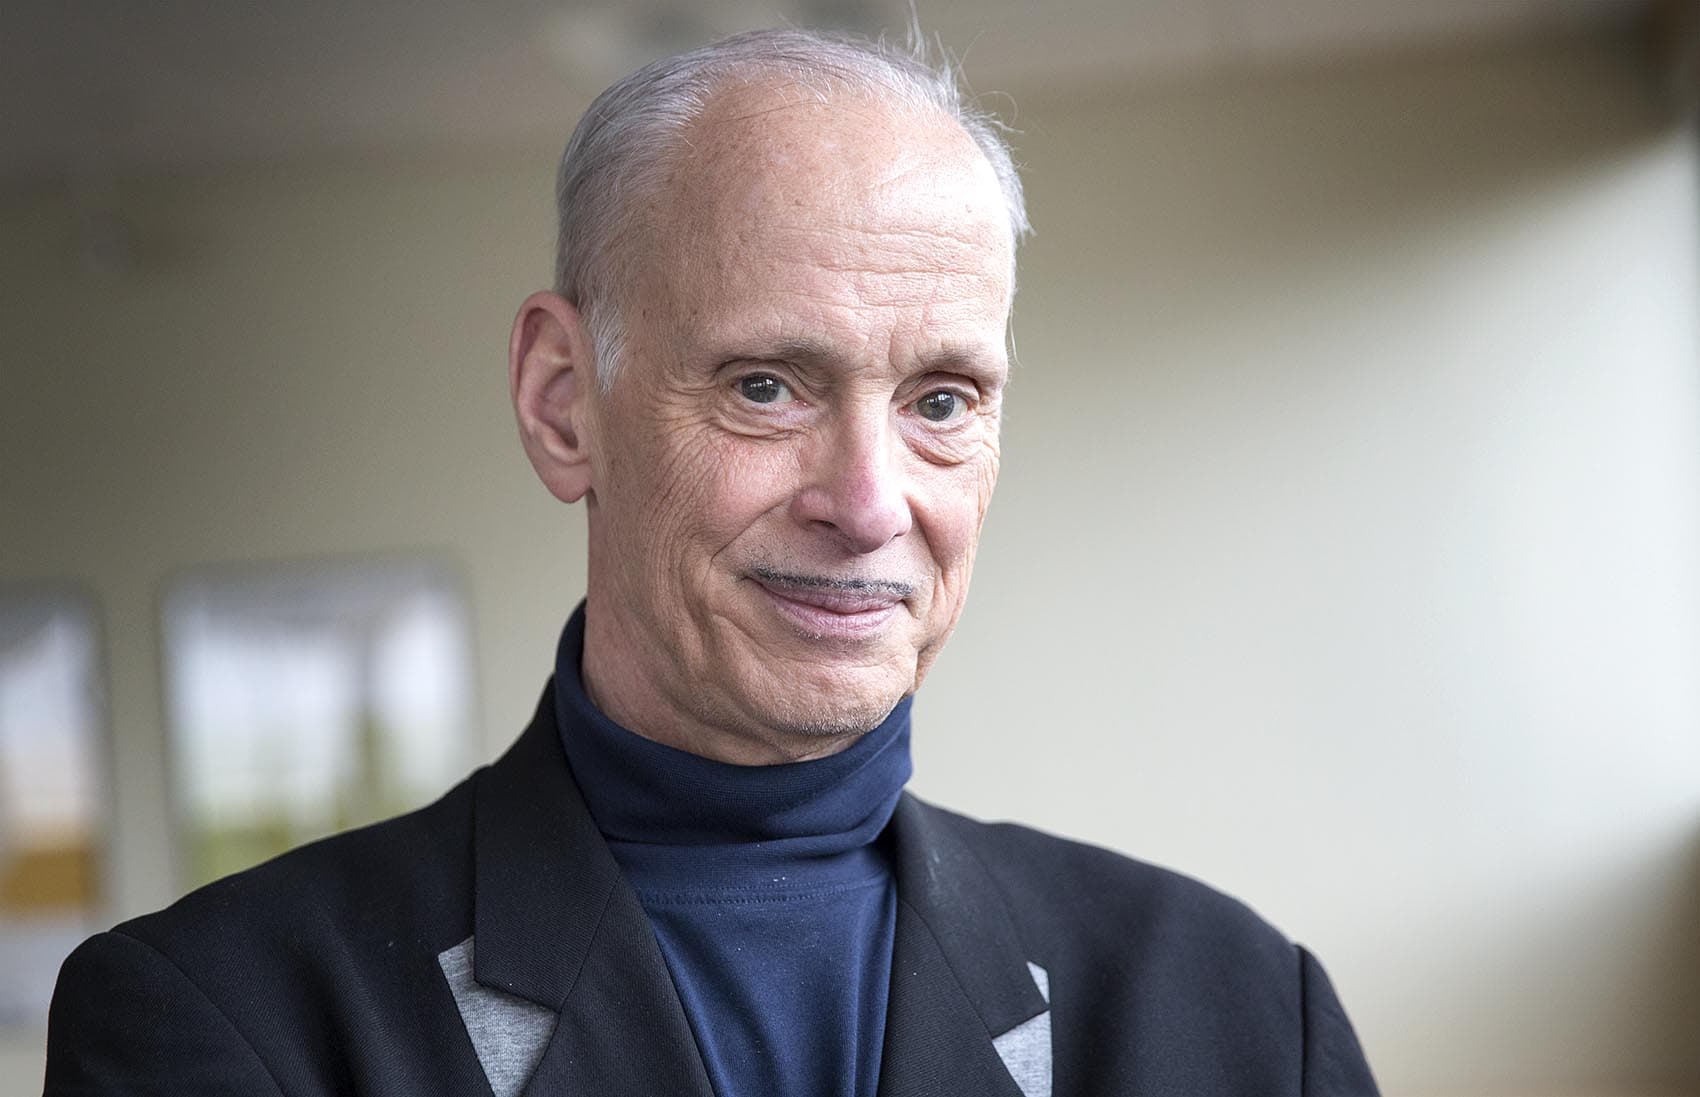 Filmmaker John Waters On Why Young People Should 'Make Trouble' Here